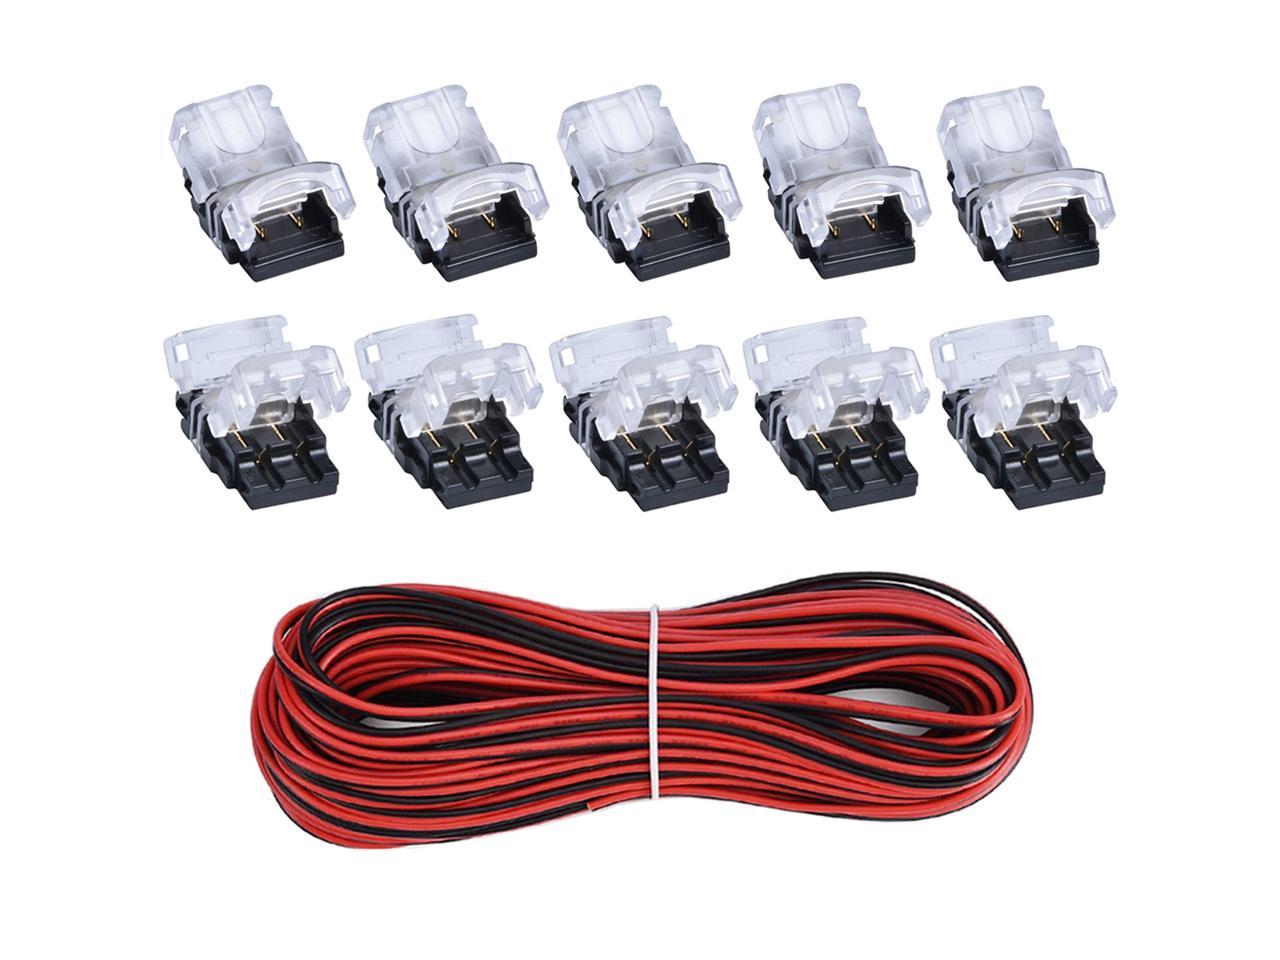 SUPERNIGHT 10 Pack 4 Pin LED Connector for Non-Waterproof 10mm RGB 5050 5630 LED Strip Lights Strip to Wire Quick Connection Without Stripping Wire 